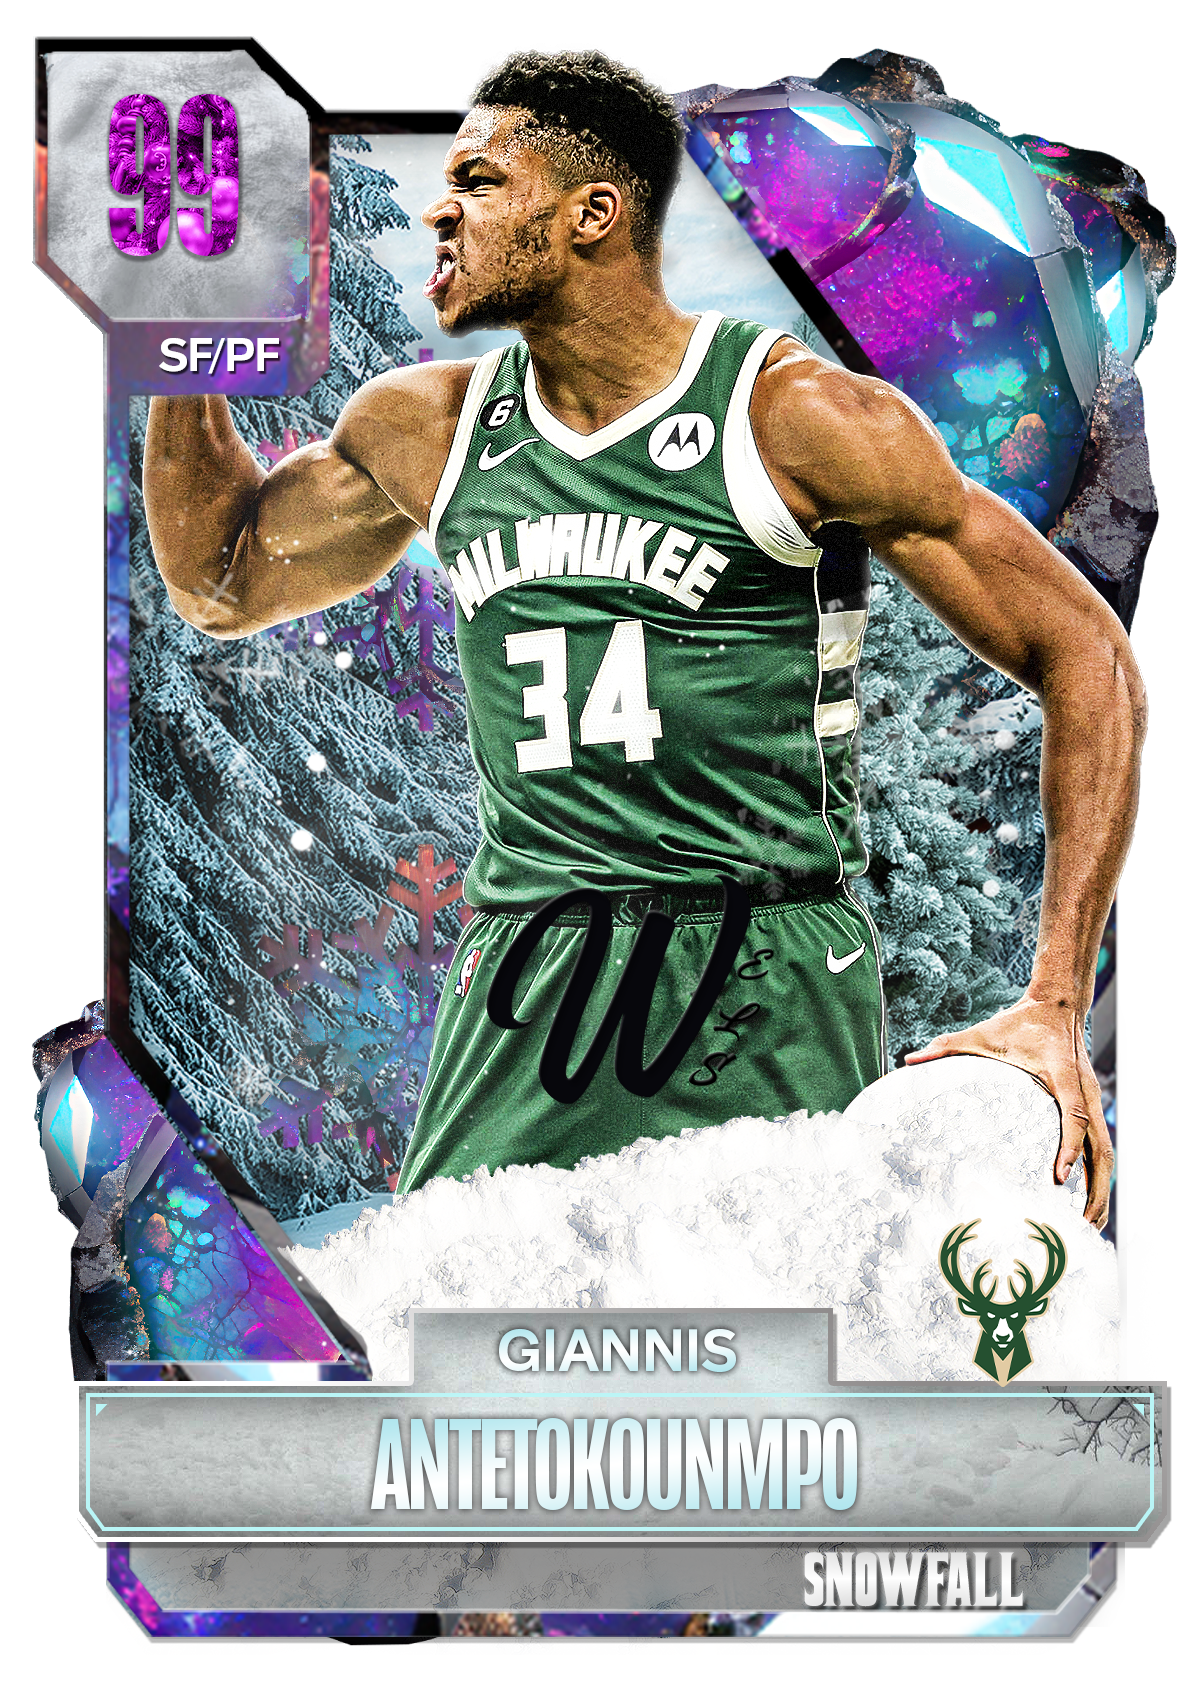 Giannis has a Snowball